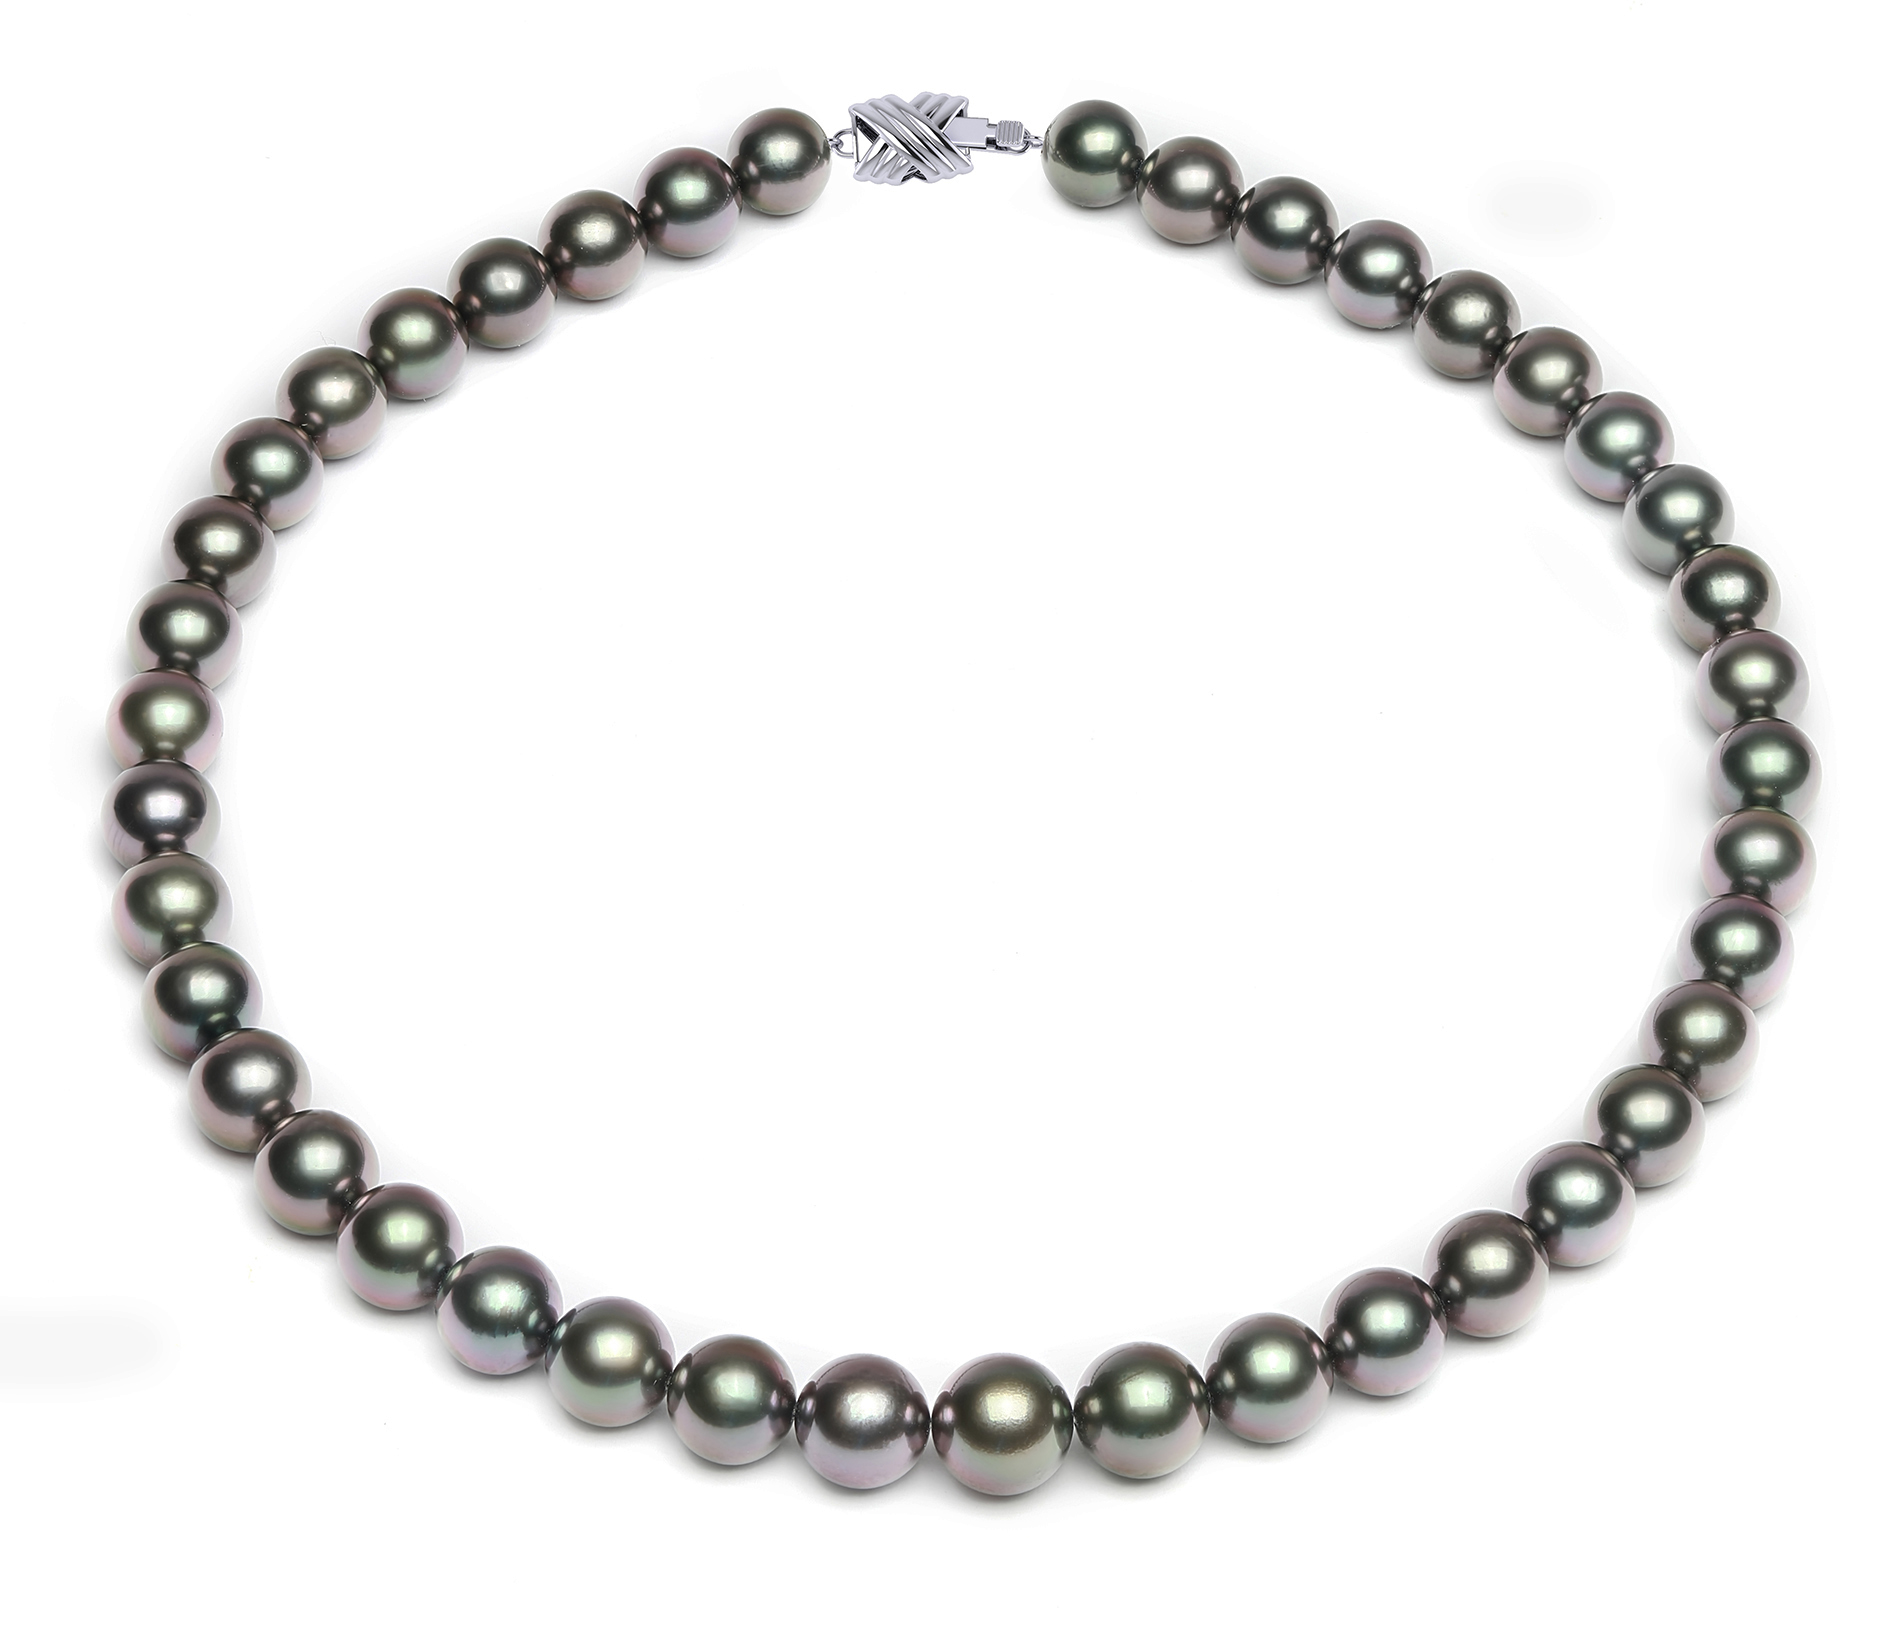 New Arrival Real pearl 9-10mm New Tahitian Black Natural Pearl Necklace 64''